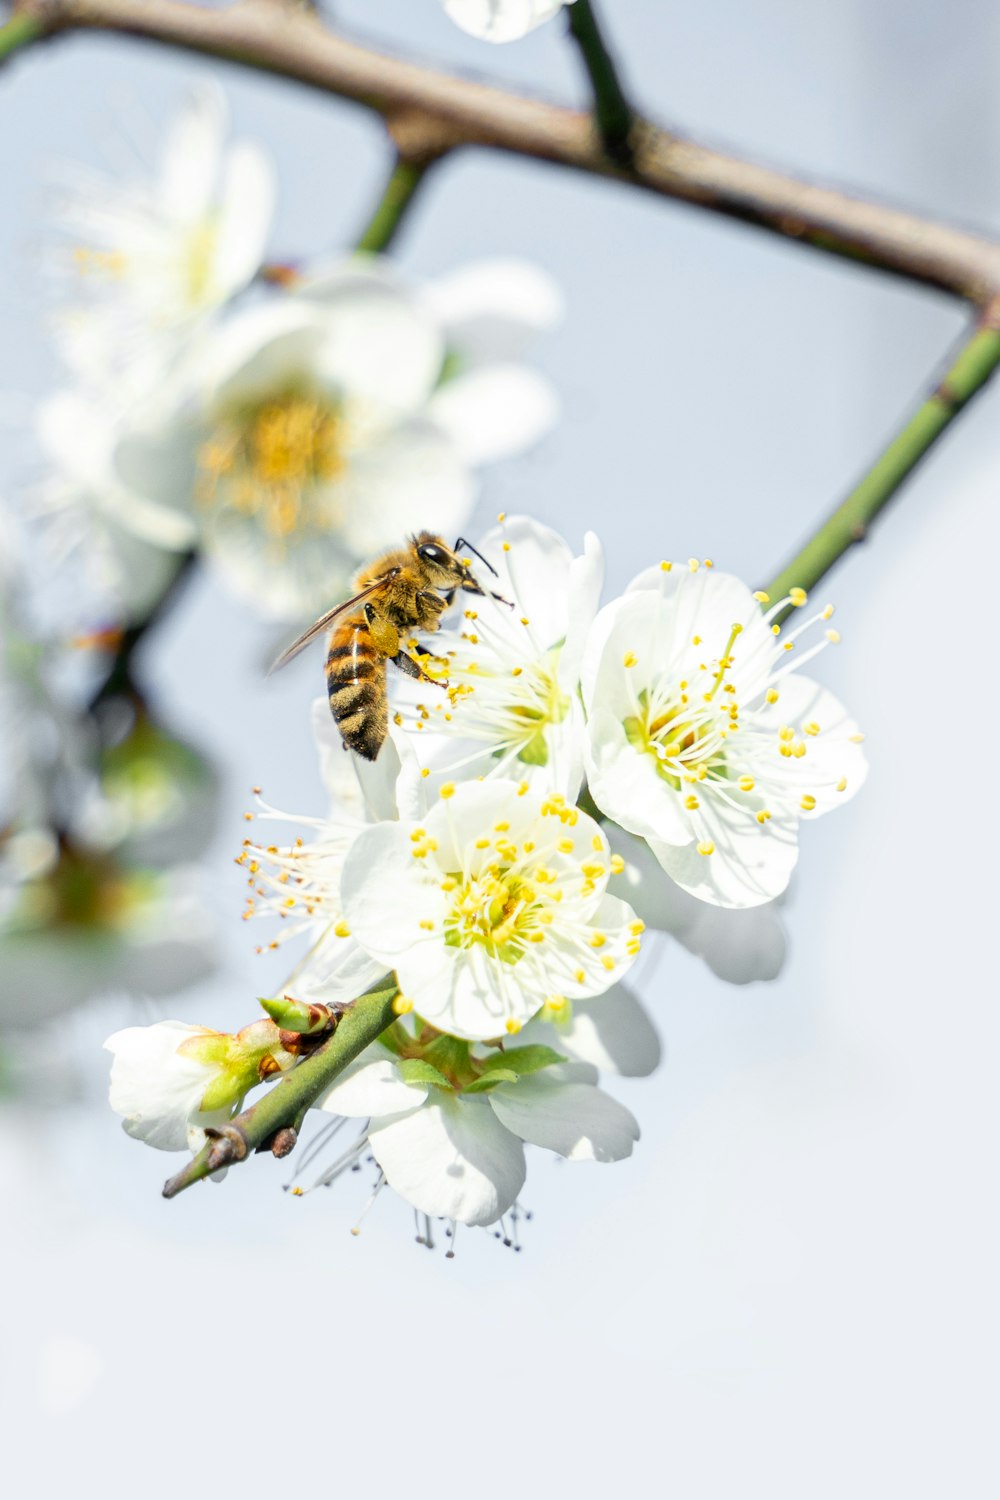 a bee on a branch with white flowers